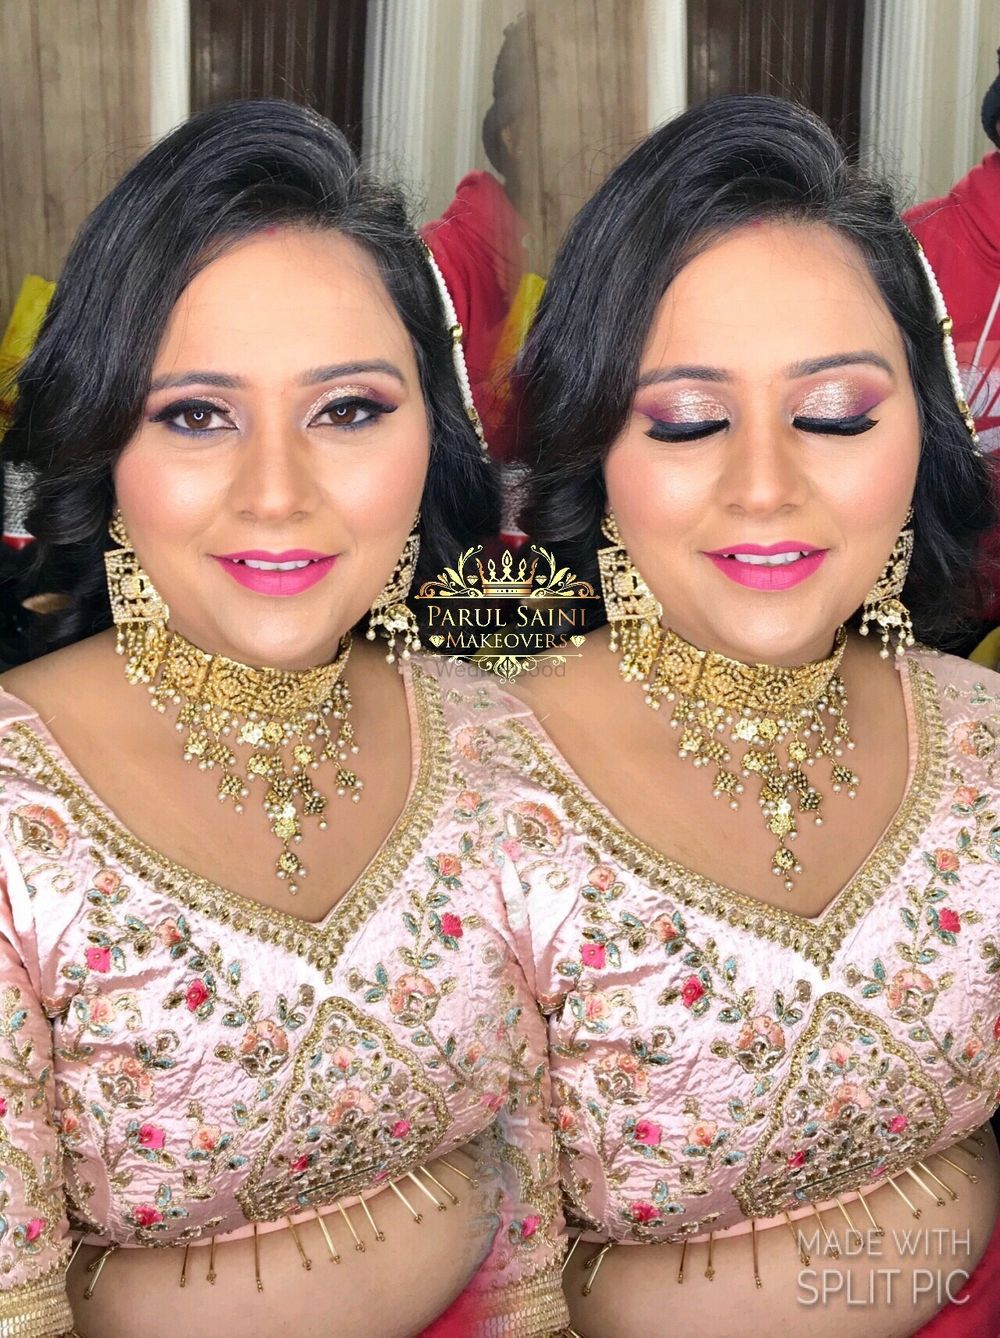 Photo From Party Makeup by parulsainimakeovers  - By Parul Saini Makeovers